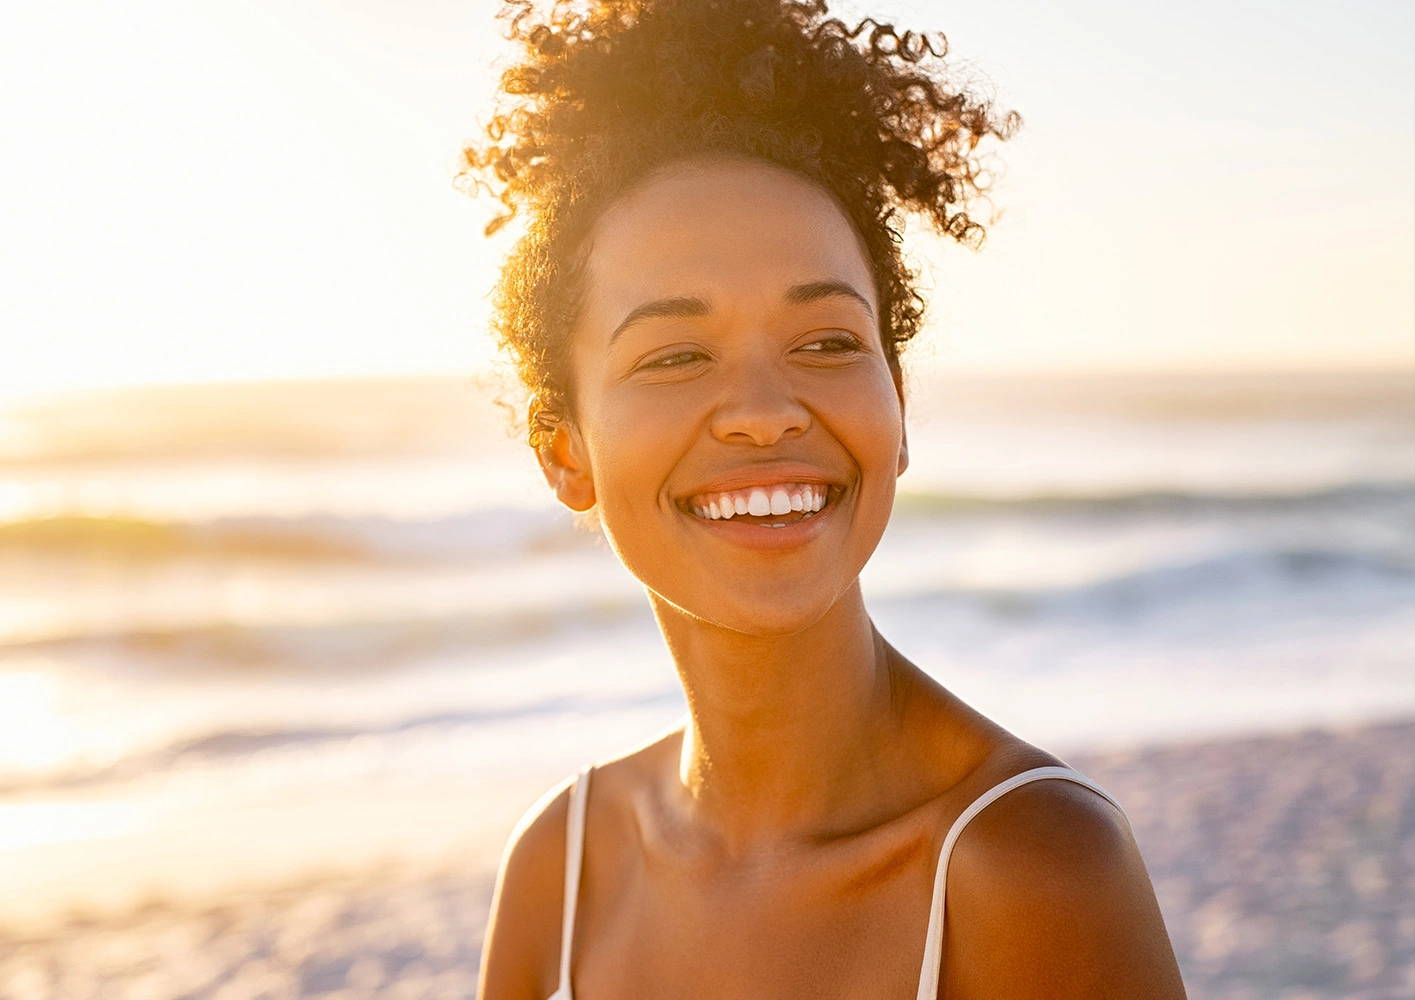 The Ultimate Guide to Vitamin D: Benefits, Sources, Levels & More